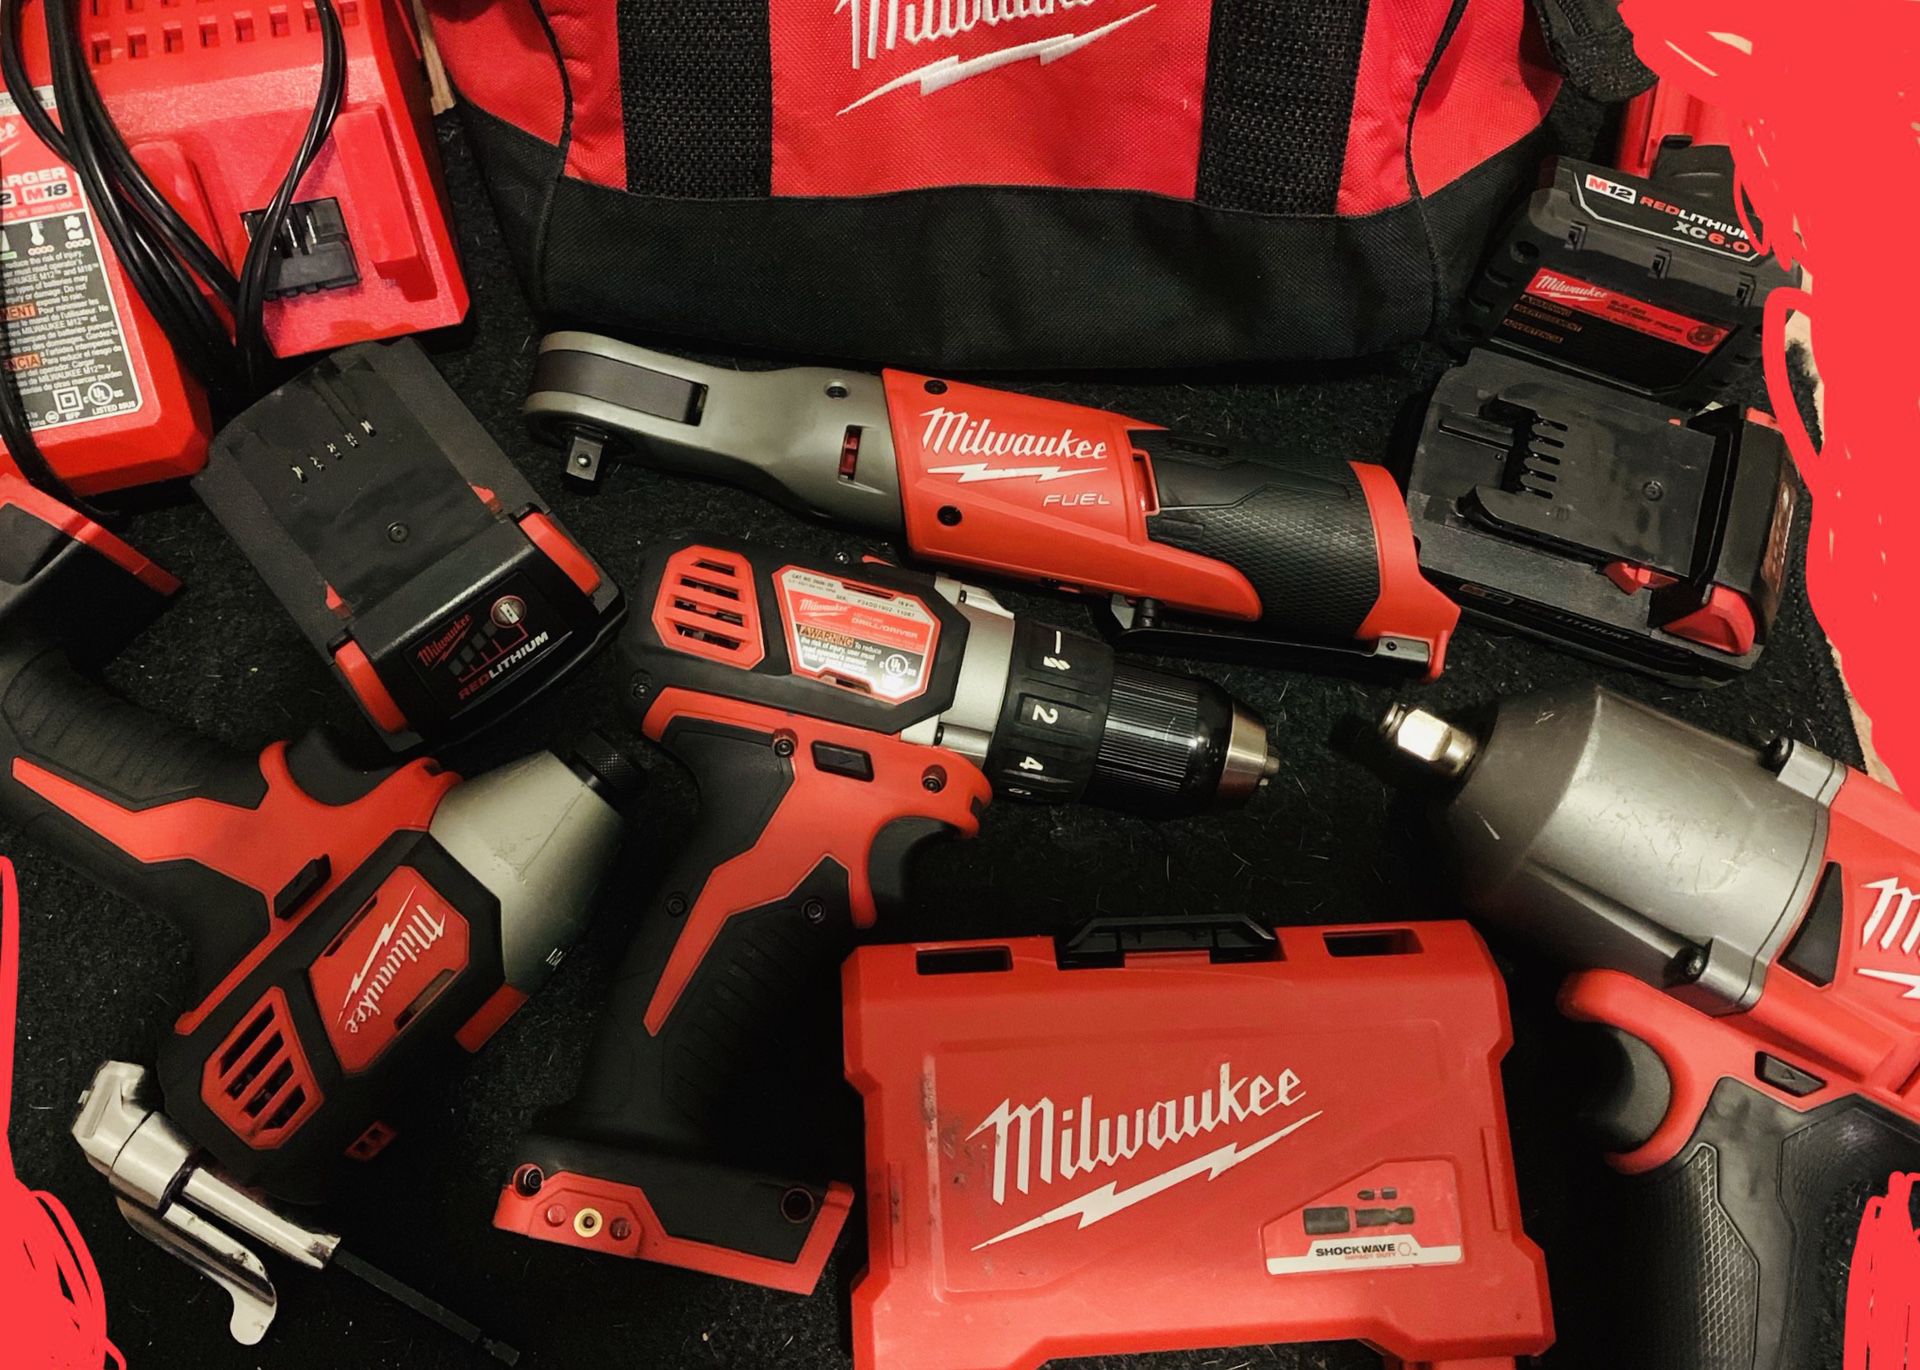 Brand new!!! 2019 Milwaukee!! Power Tool Set 700 obo!! Trades for chevy stuff and music!!